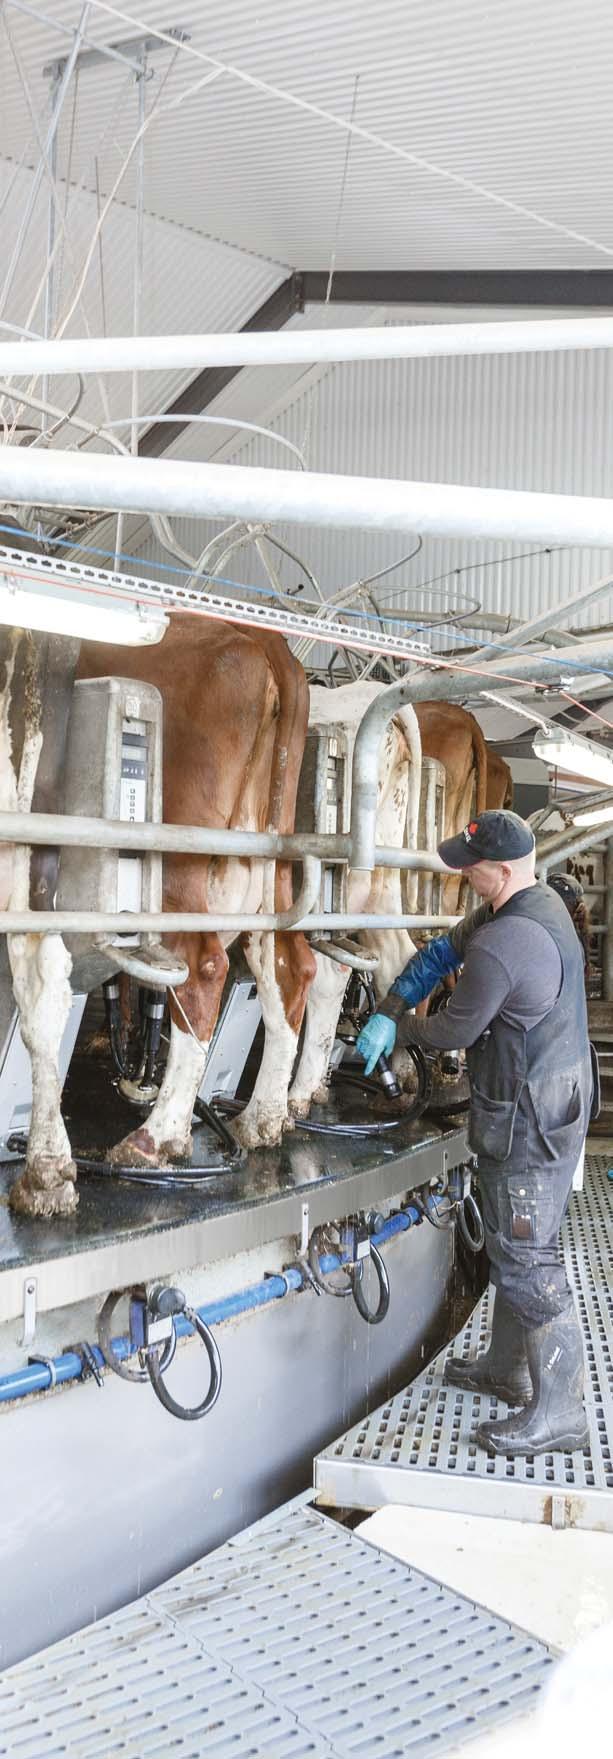 Factors to consider for achieving high throughputs Adjusting rotation time The speed of the platform must be adjusted to suit the milk-out time of the different cow groups, the herd and seasonal